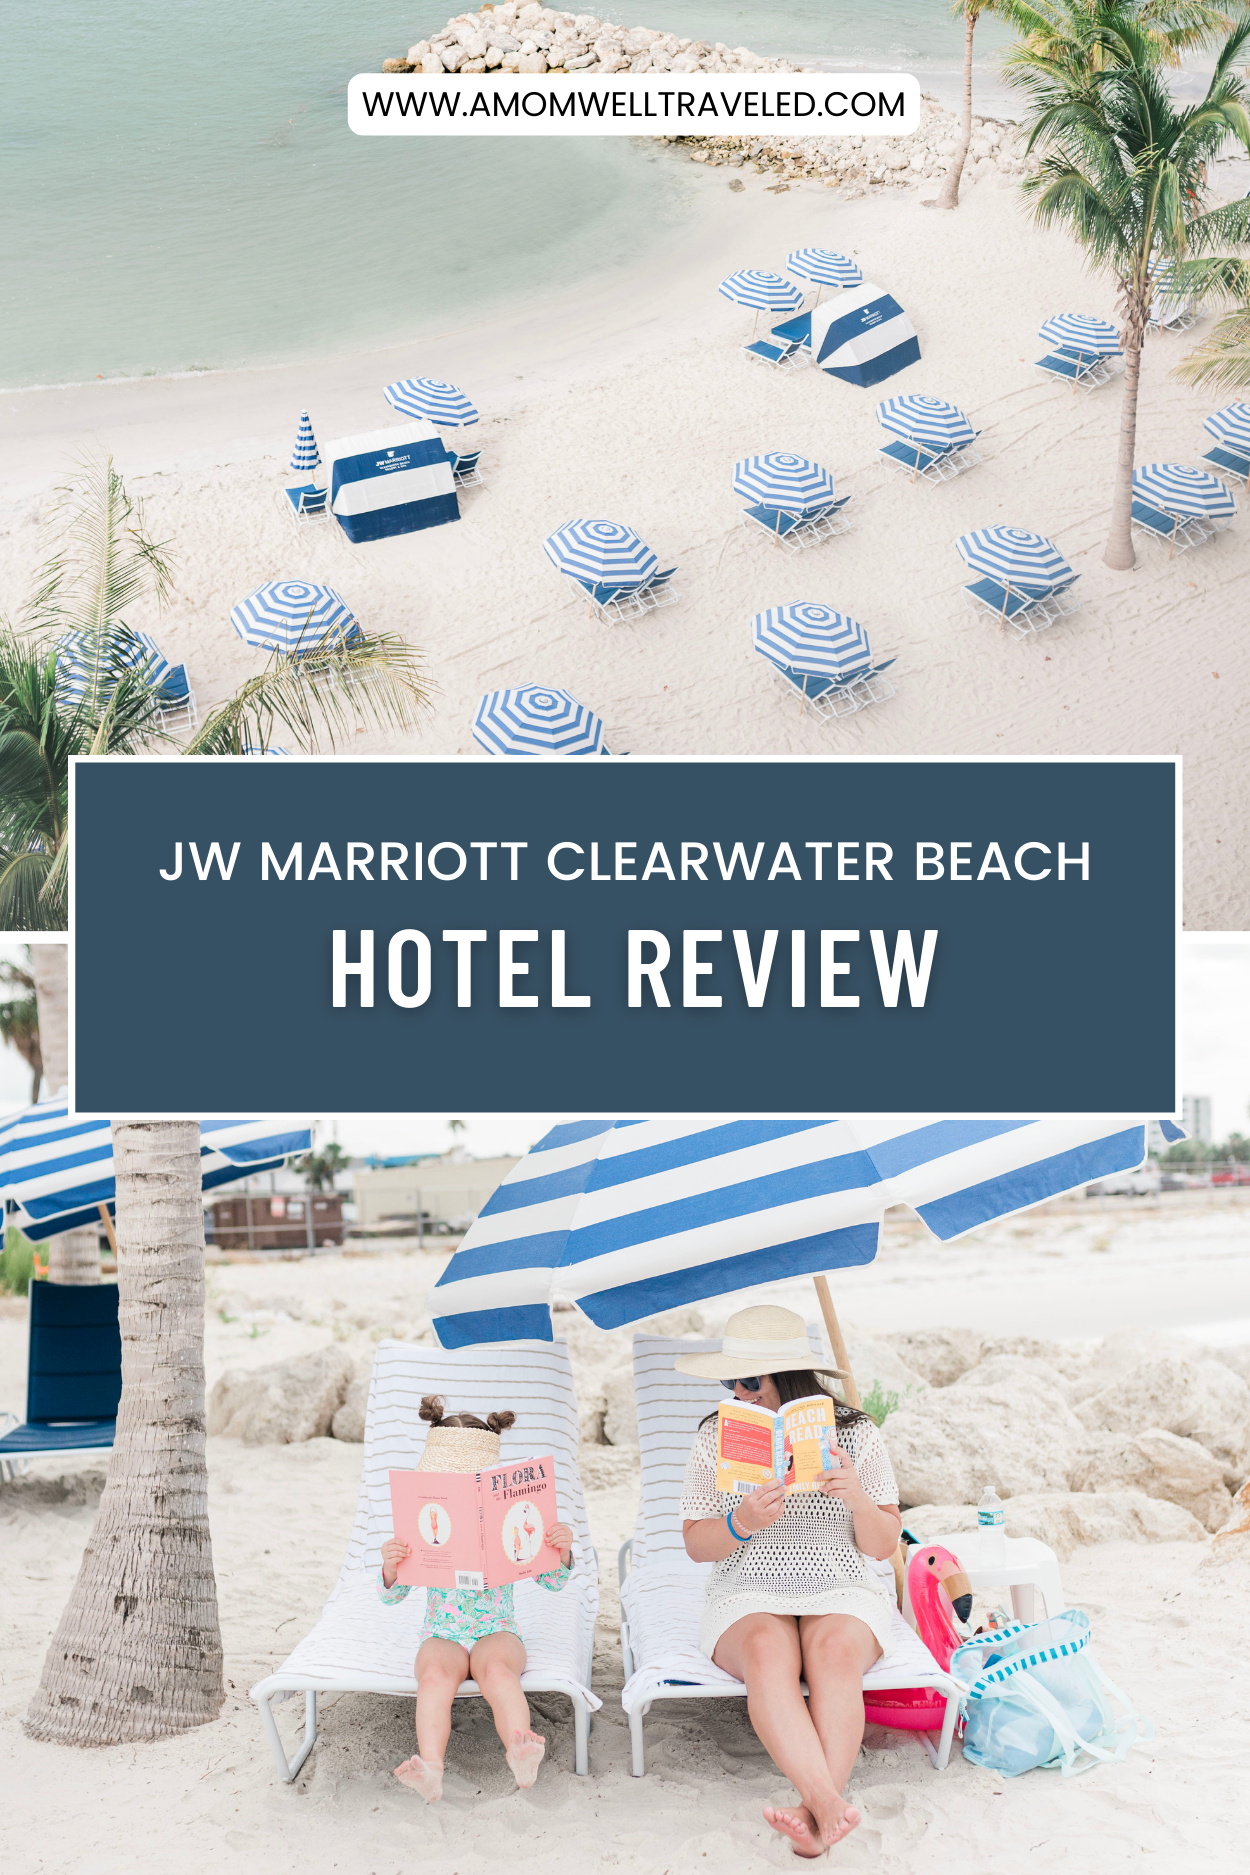 Pinterest Pin for the best beach resort in clearwater beach, florida, the JW Marriott Clearwater Beach by A Mom Well Traveled Blog